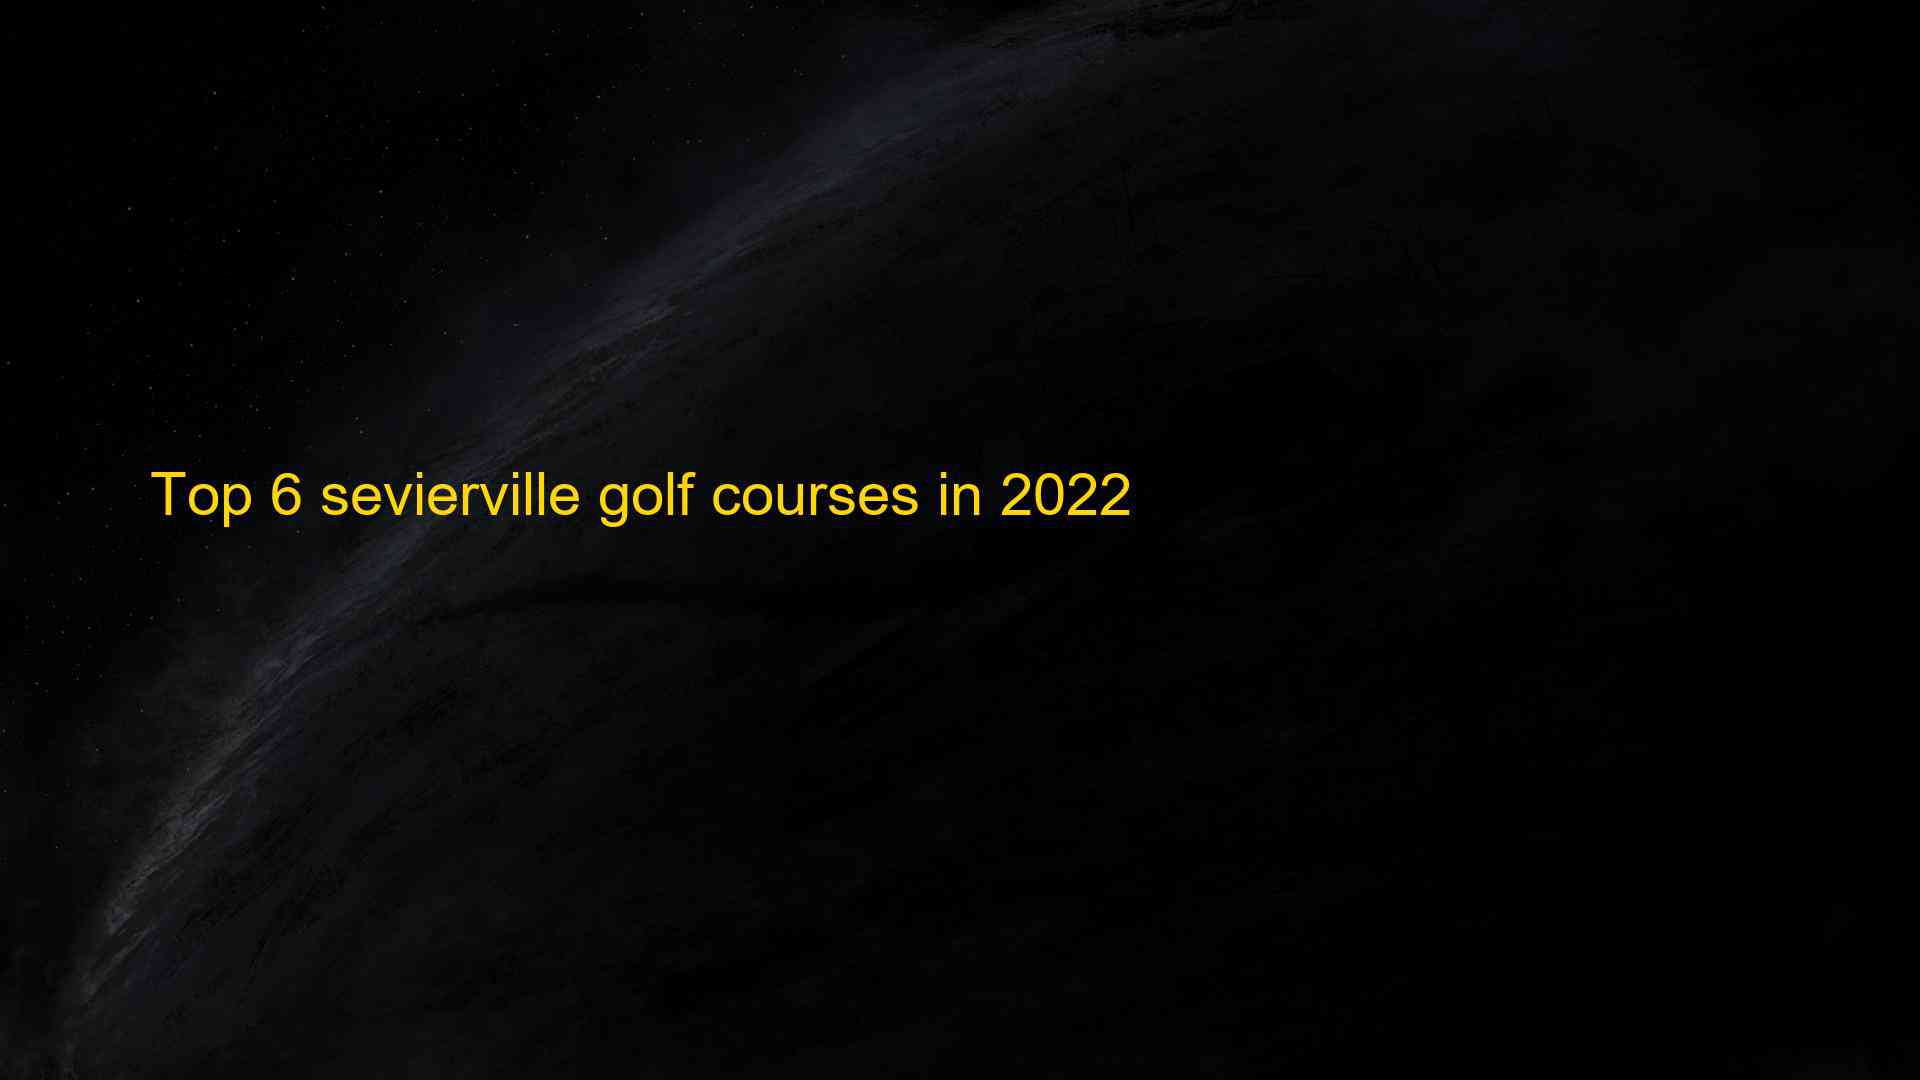 Top 6 sevierville golf courses in 2022 1661536645